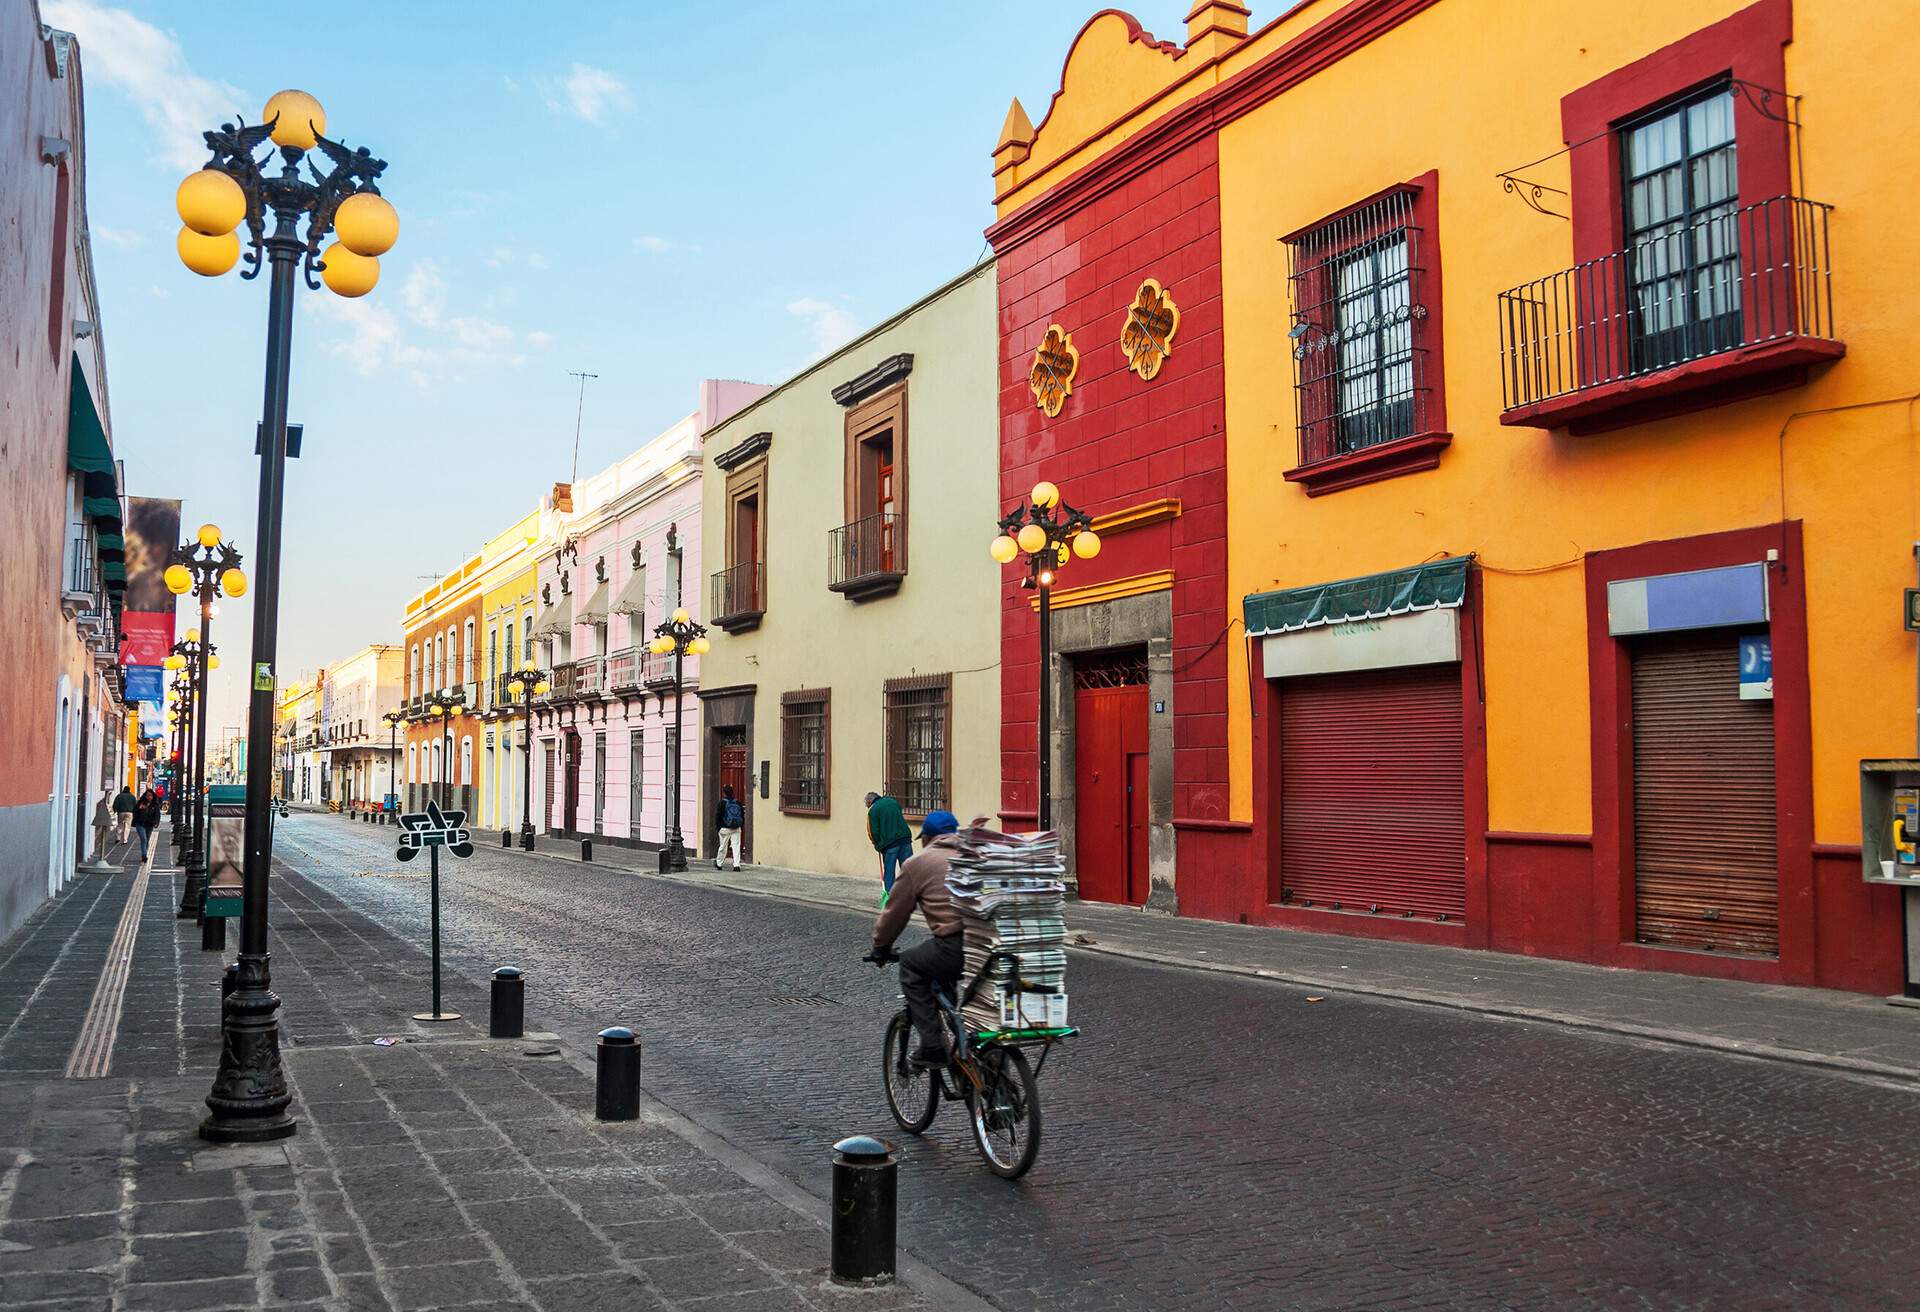 Colonial street in the old town of Puebla, Mexico